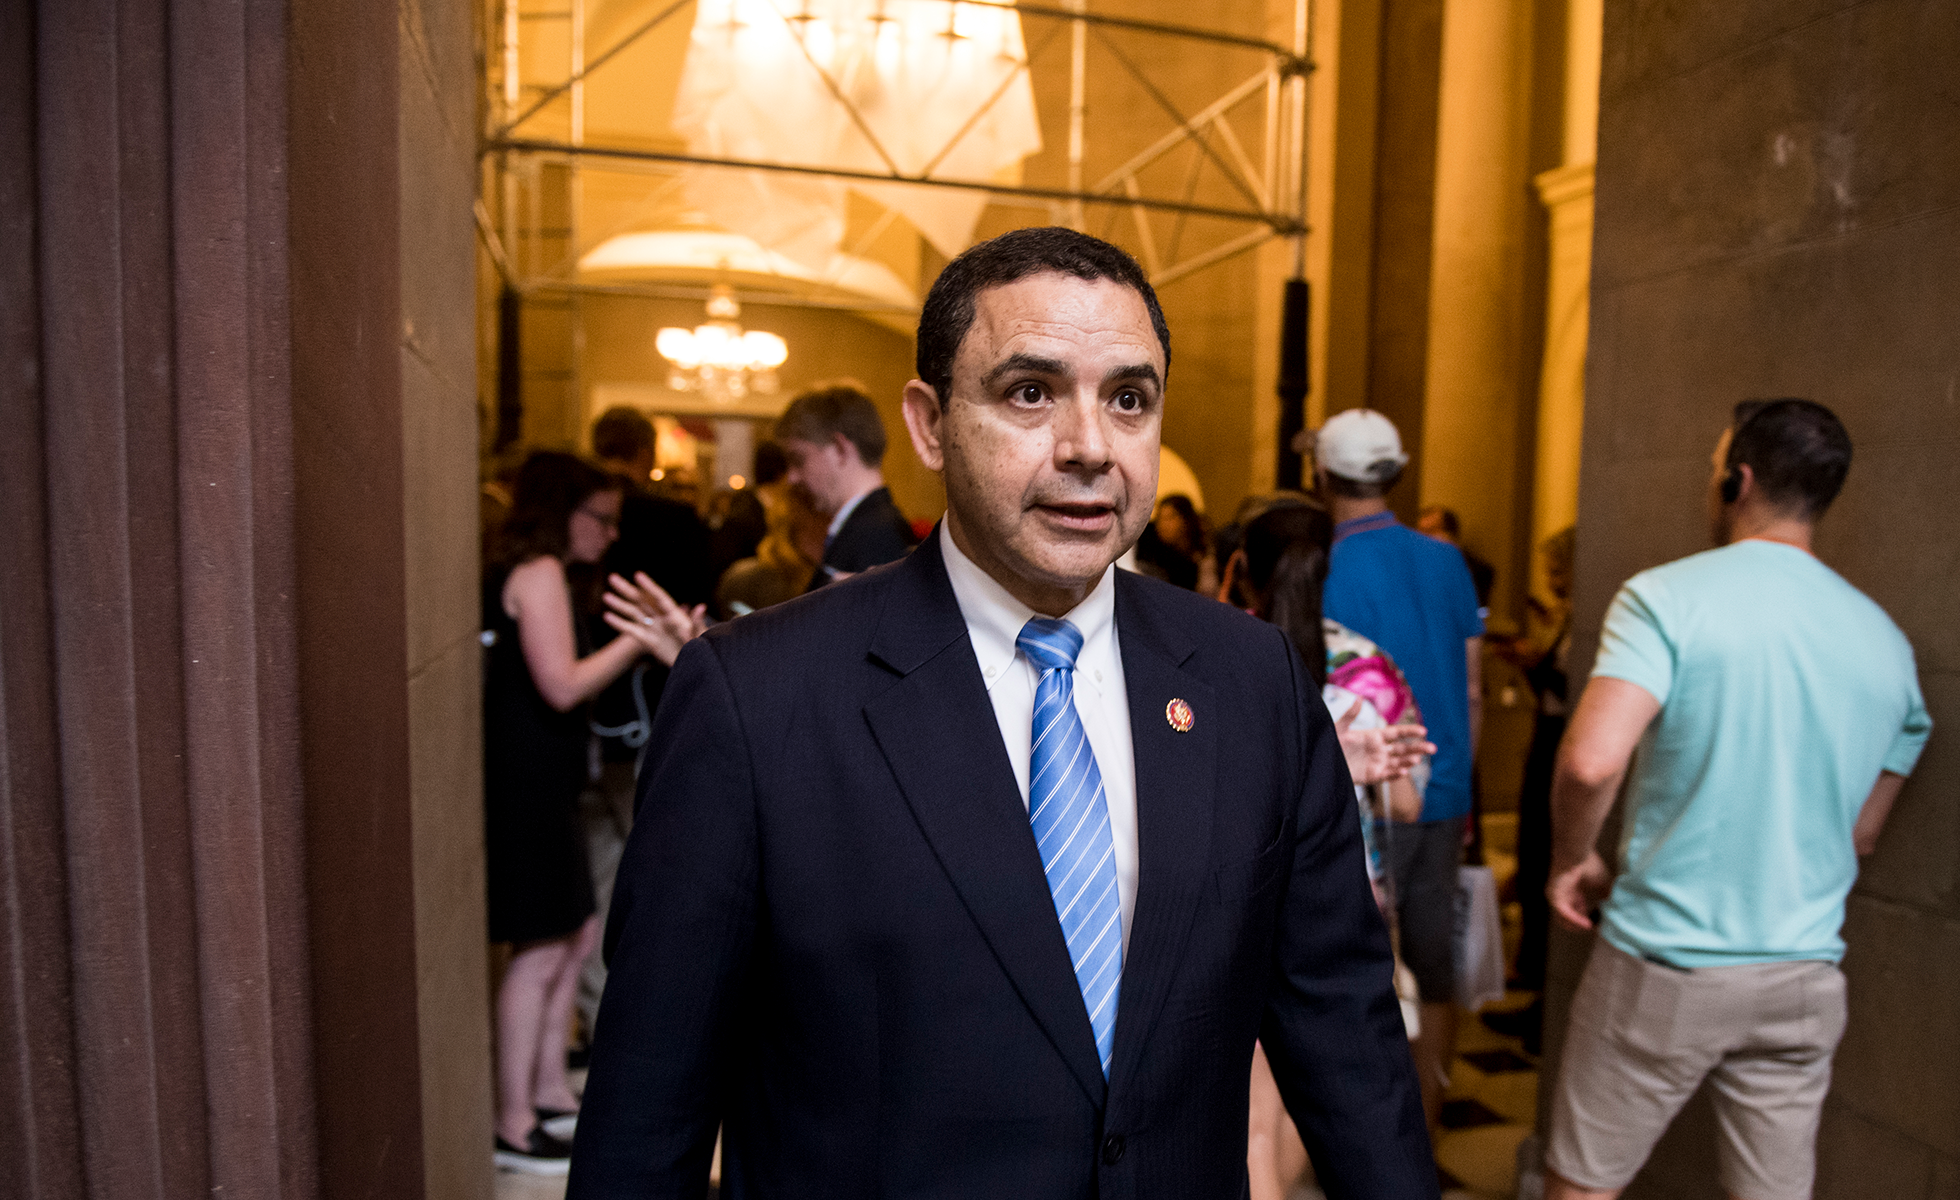 Rep. Henry Cuellar, D-Texas, walks away after speaking with reporters outside of Speaker Pelosi's office about the agreement to take up the Senate border bill on Thursday, June 27, 2019. (Photo By Bill Clark/CQ Roll Call via AP Images)